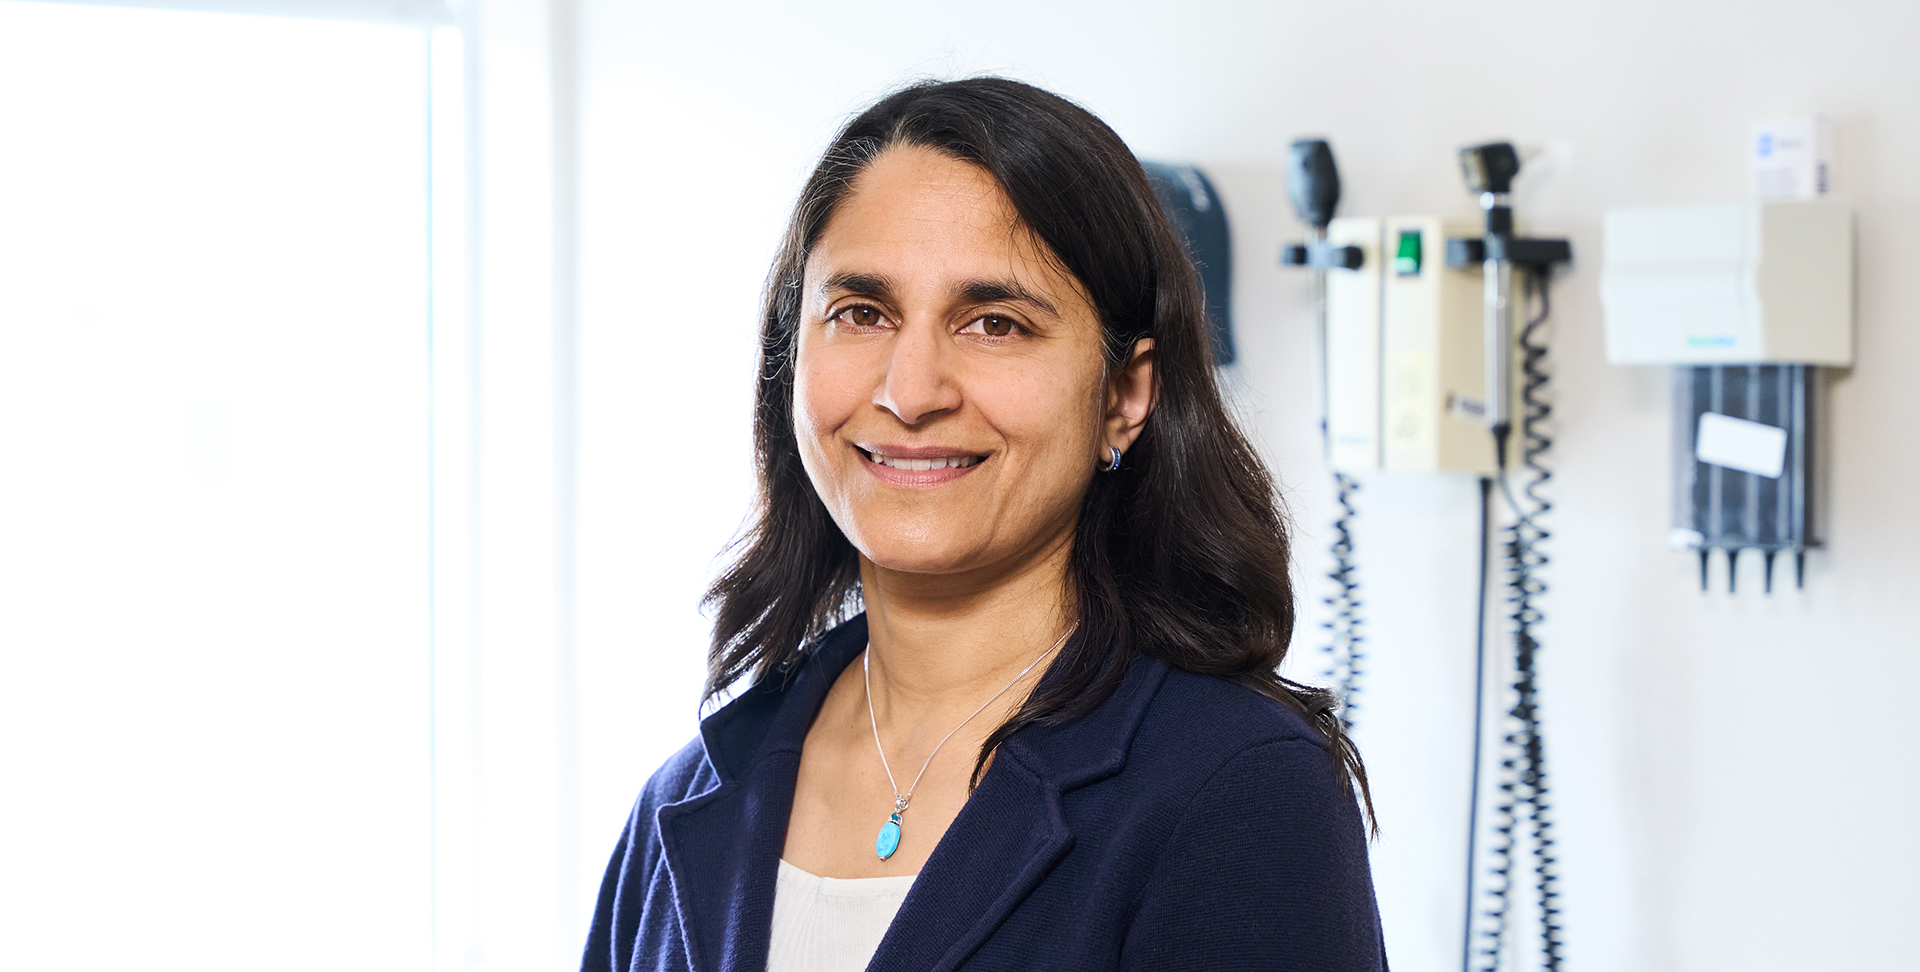 Heart & Stroke researcher Dr. Sonia Anand